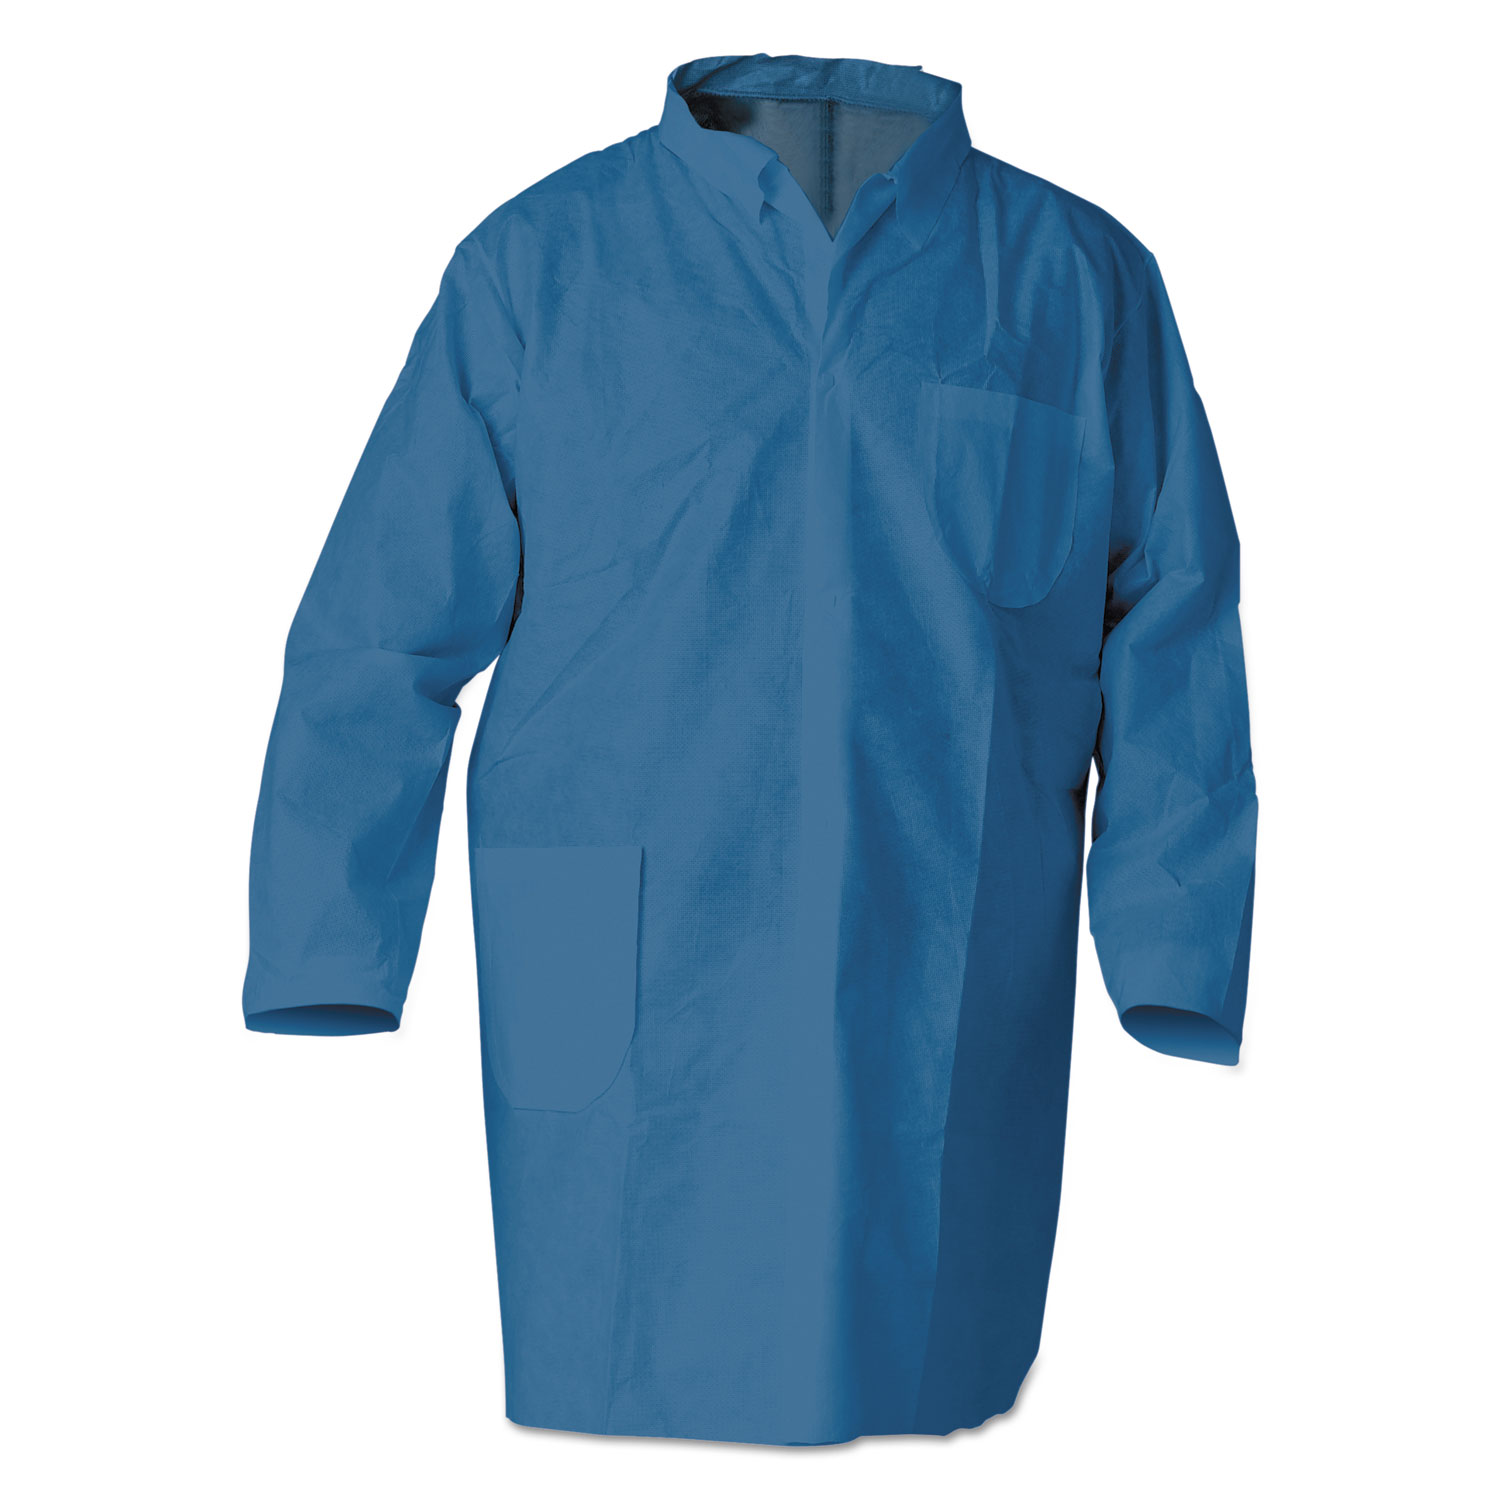 A20 Breathable Particle Protection Professional Jacket, Large, Blue, 15/Carton